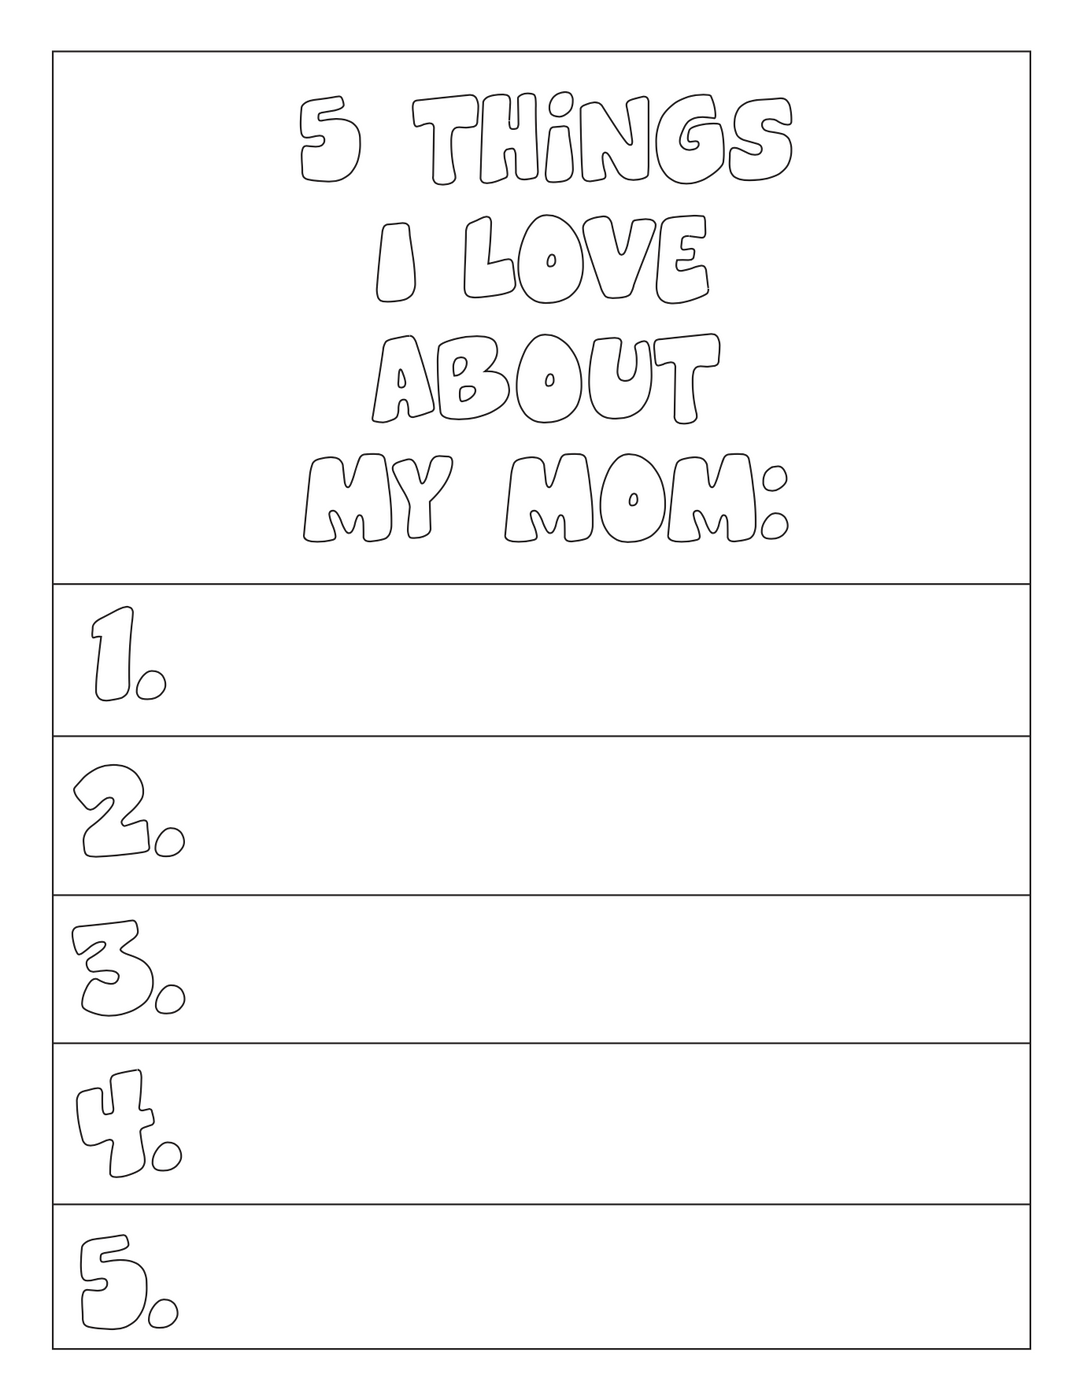 5 Things I Love About Mom